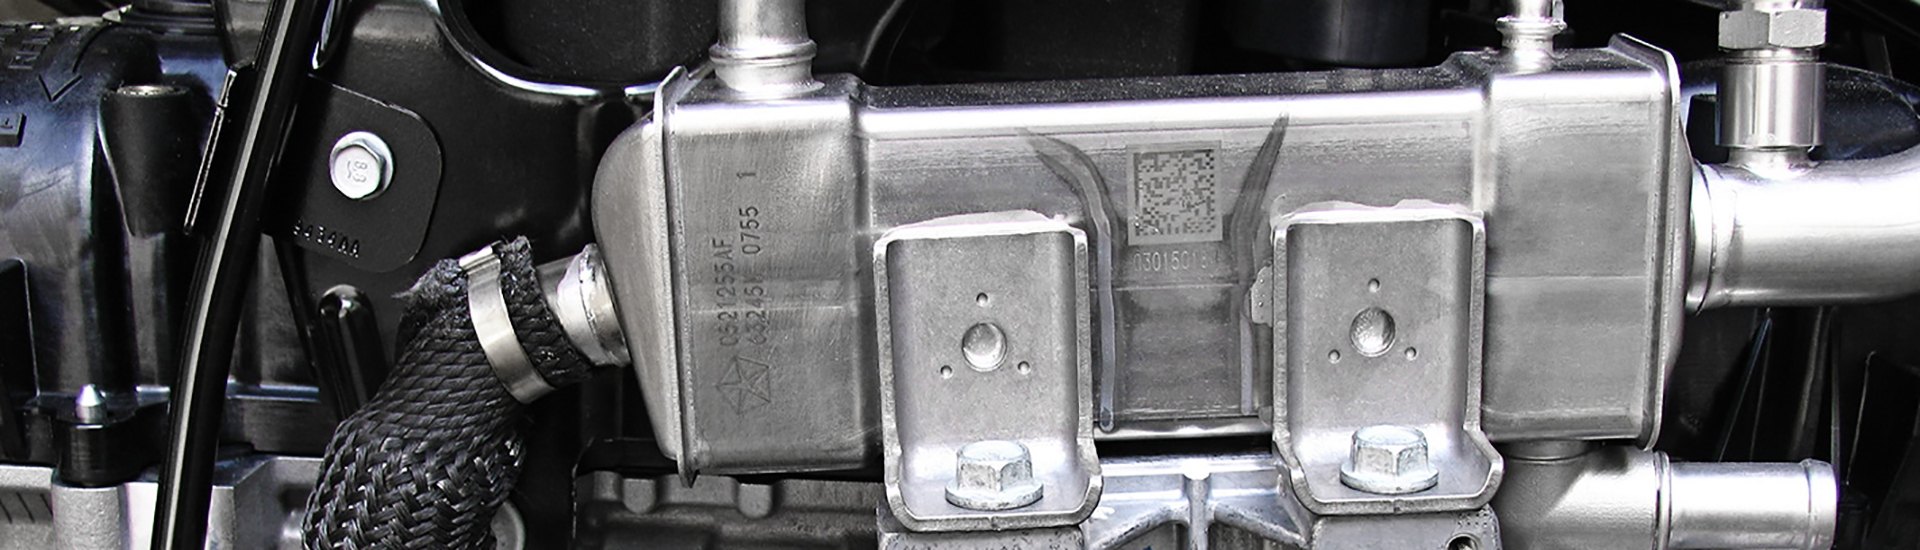 Semi Truck Replacement Emission Control Parts